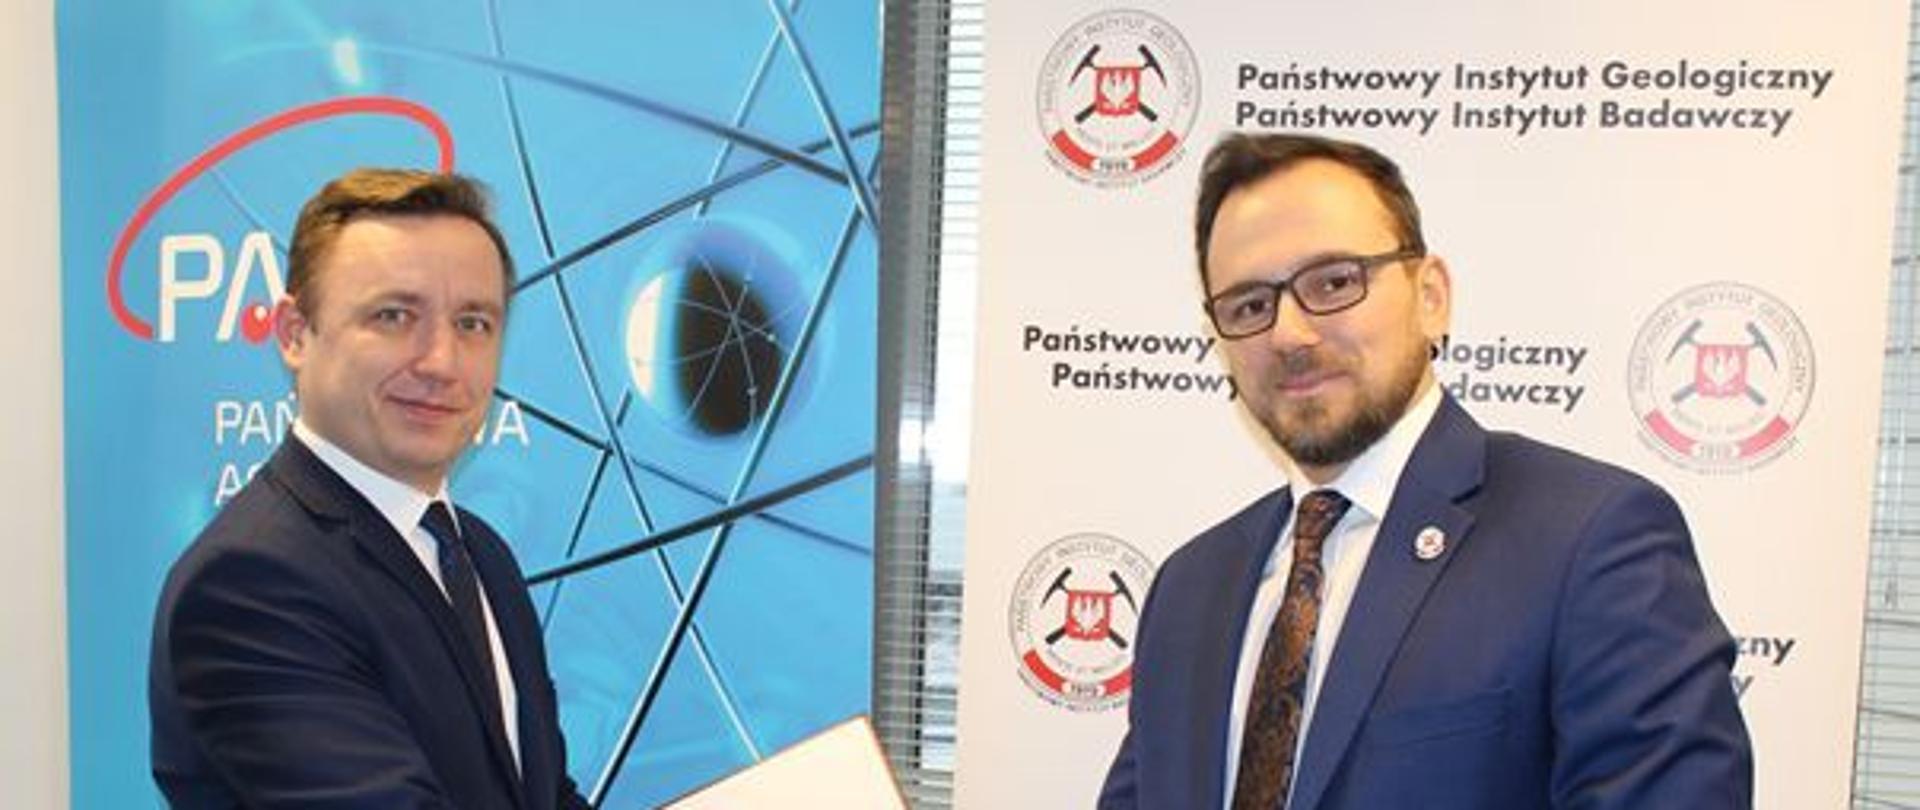 Handing over the authorization by the acting President of the PAA, Andrzej Głowacki, to the Director of the PGI-NRI, dr. Eng. Mateusz Damrat